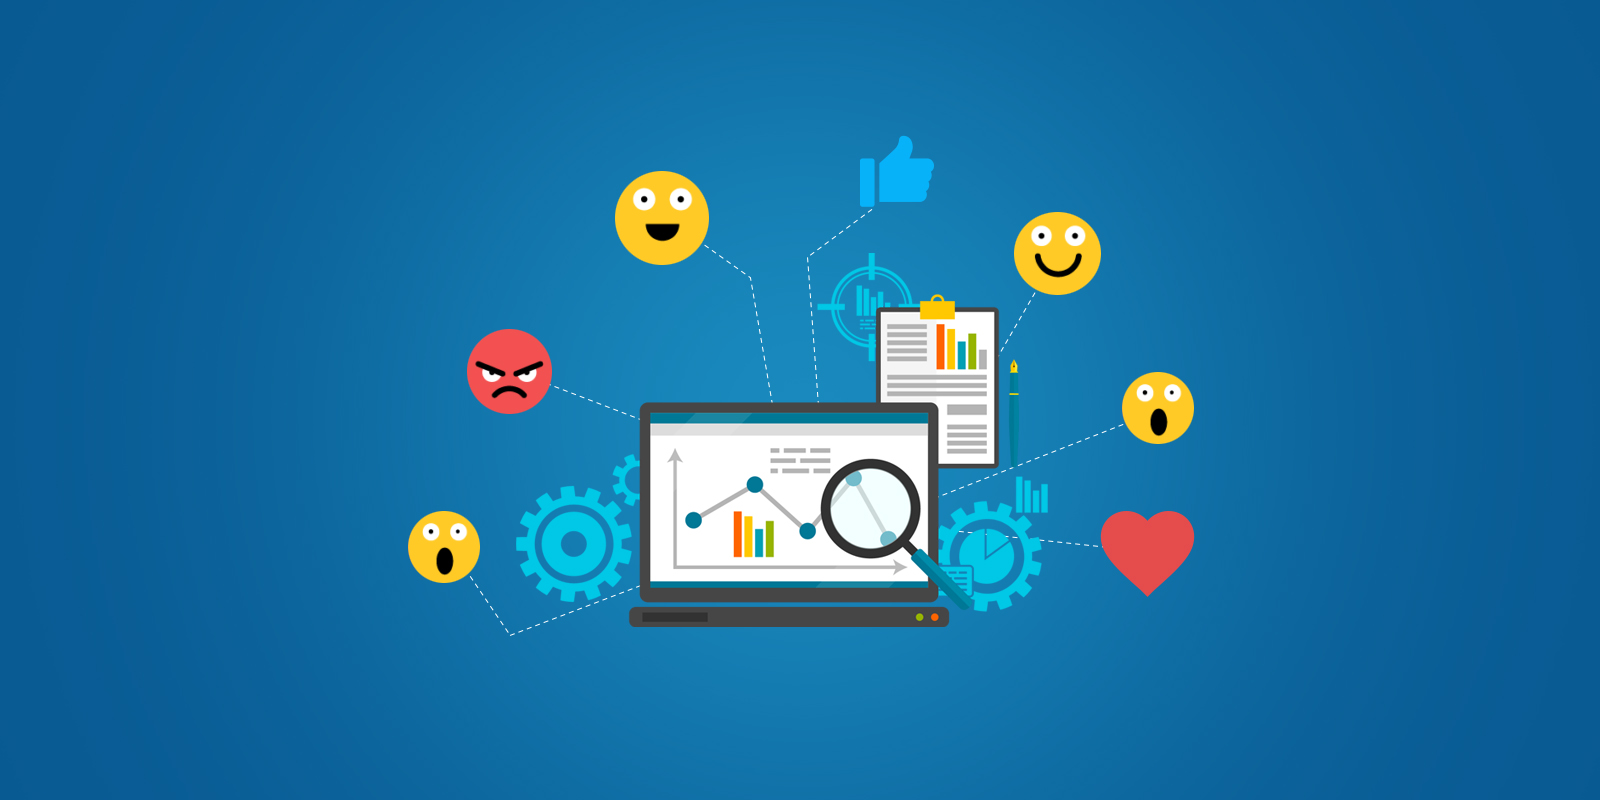 Customer Sentiment drives Product Recommendation